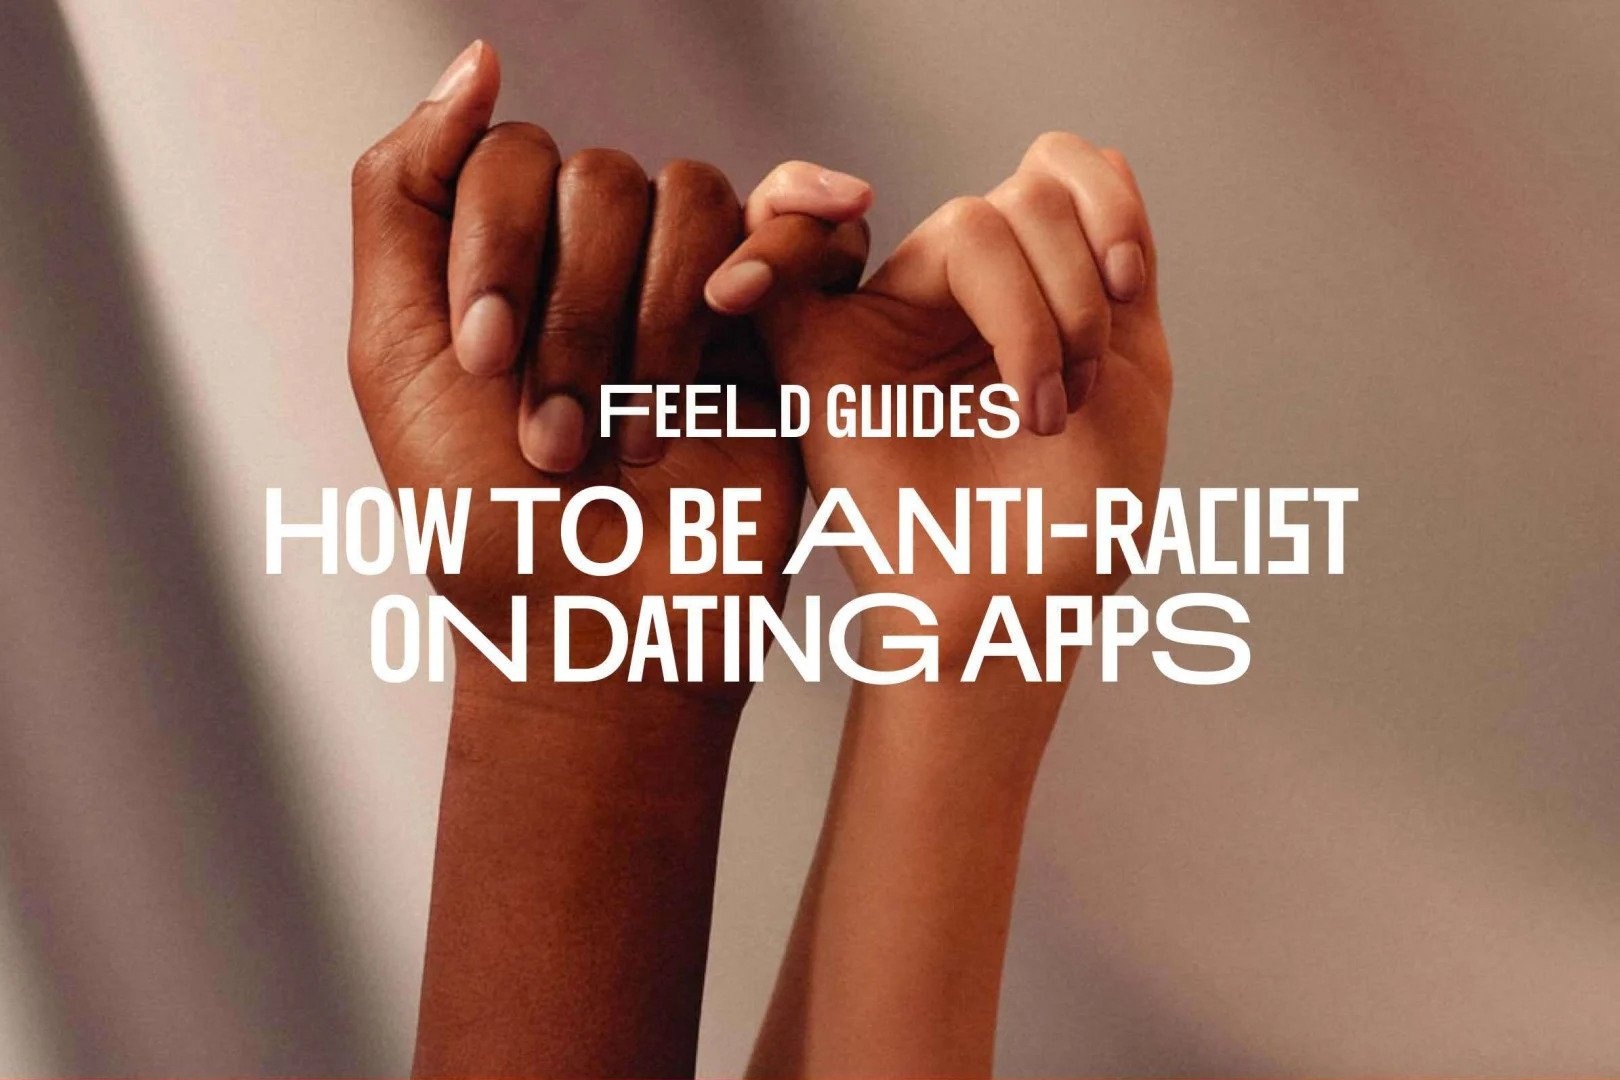 How to be anti-racist on dating apps